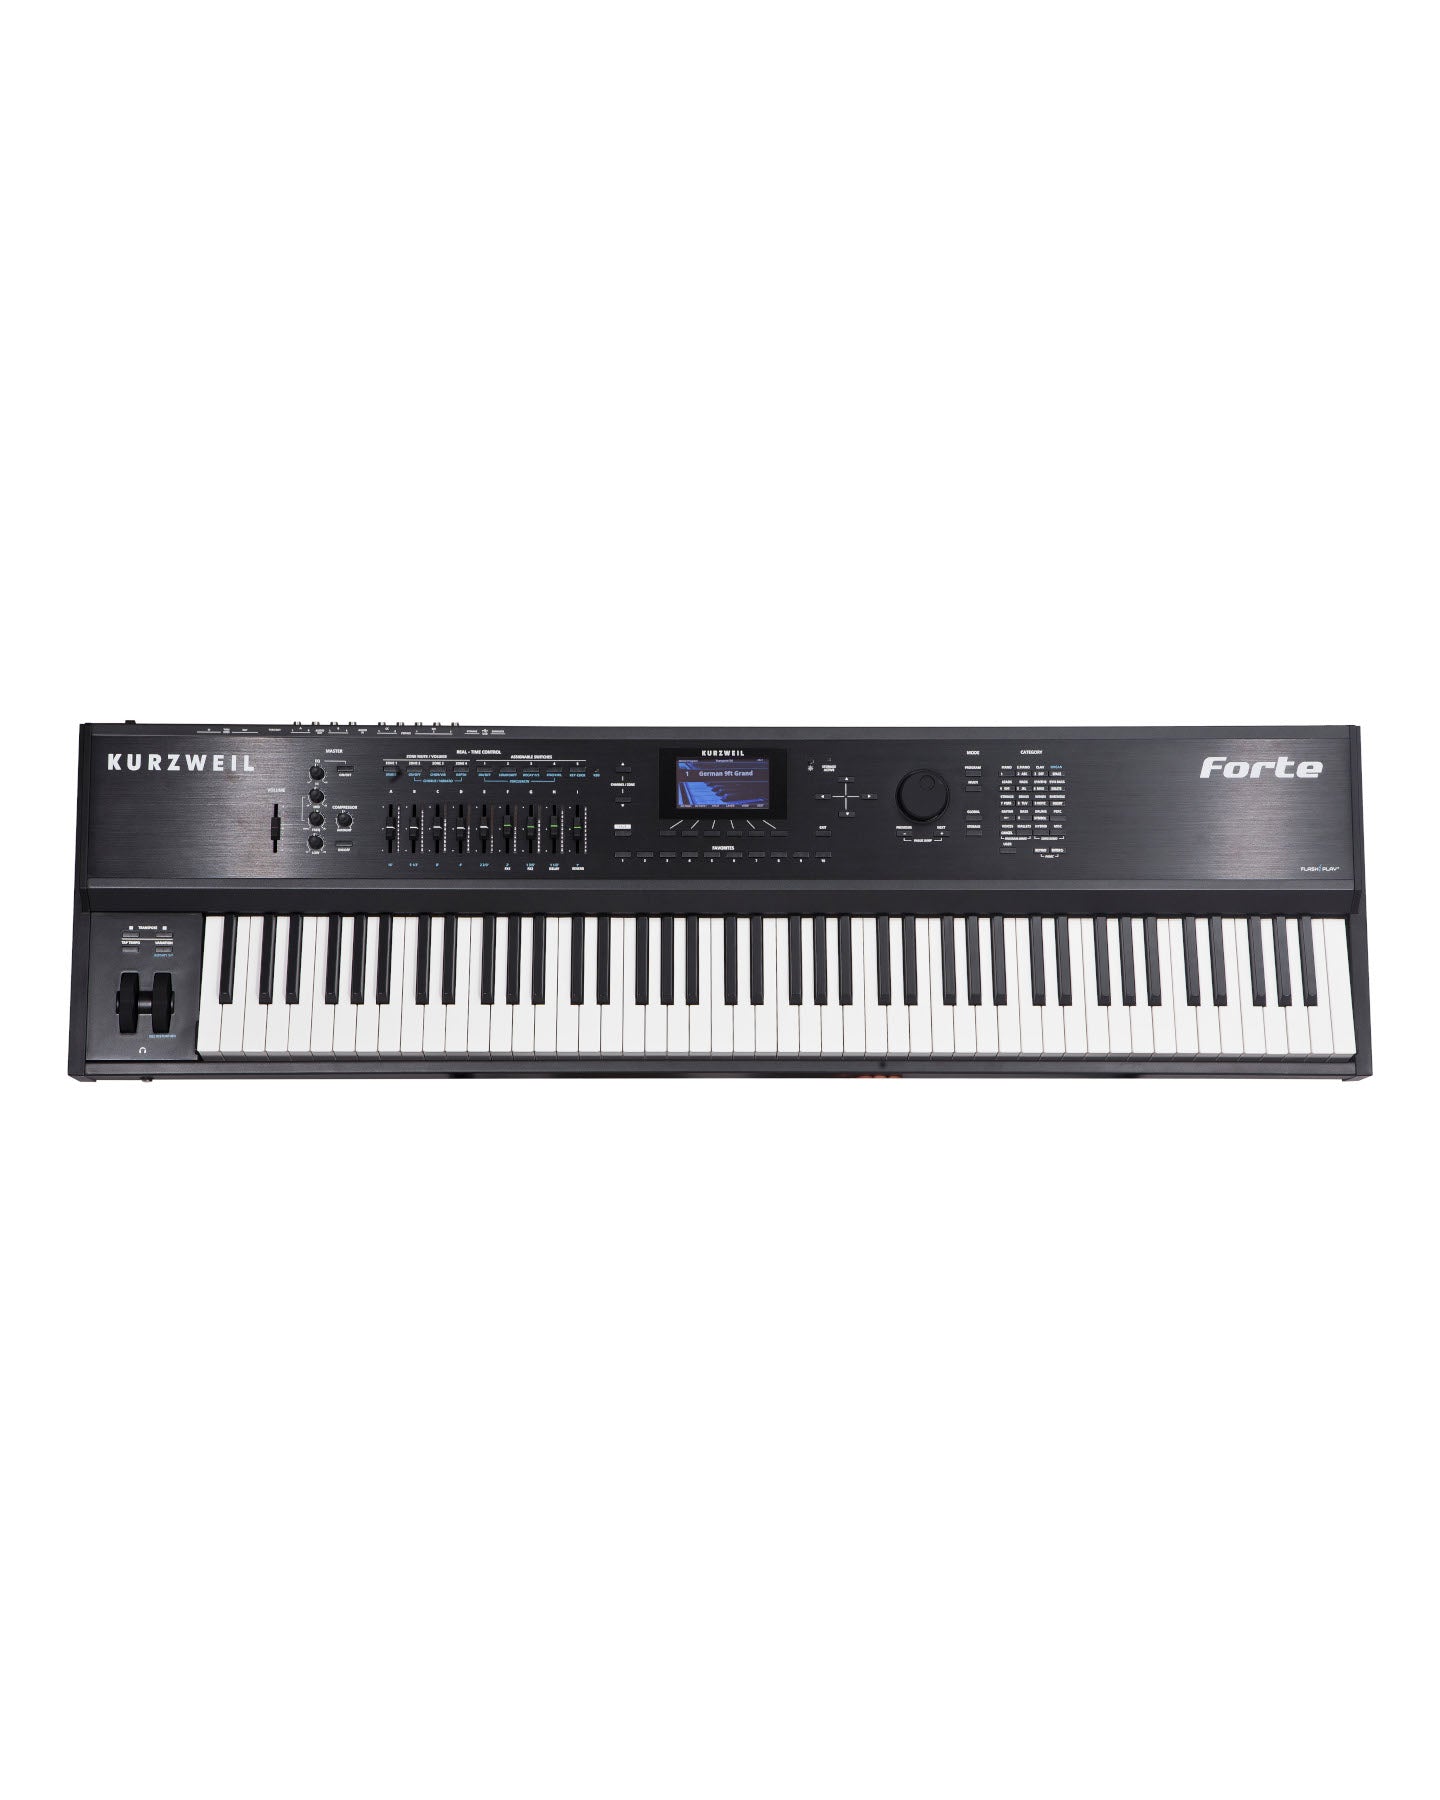 B-Stock Forte 88-Key Stage Piano, Factory Refurbished